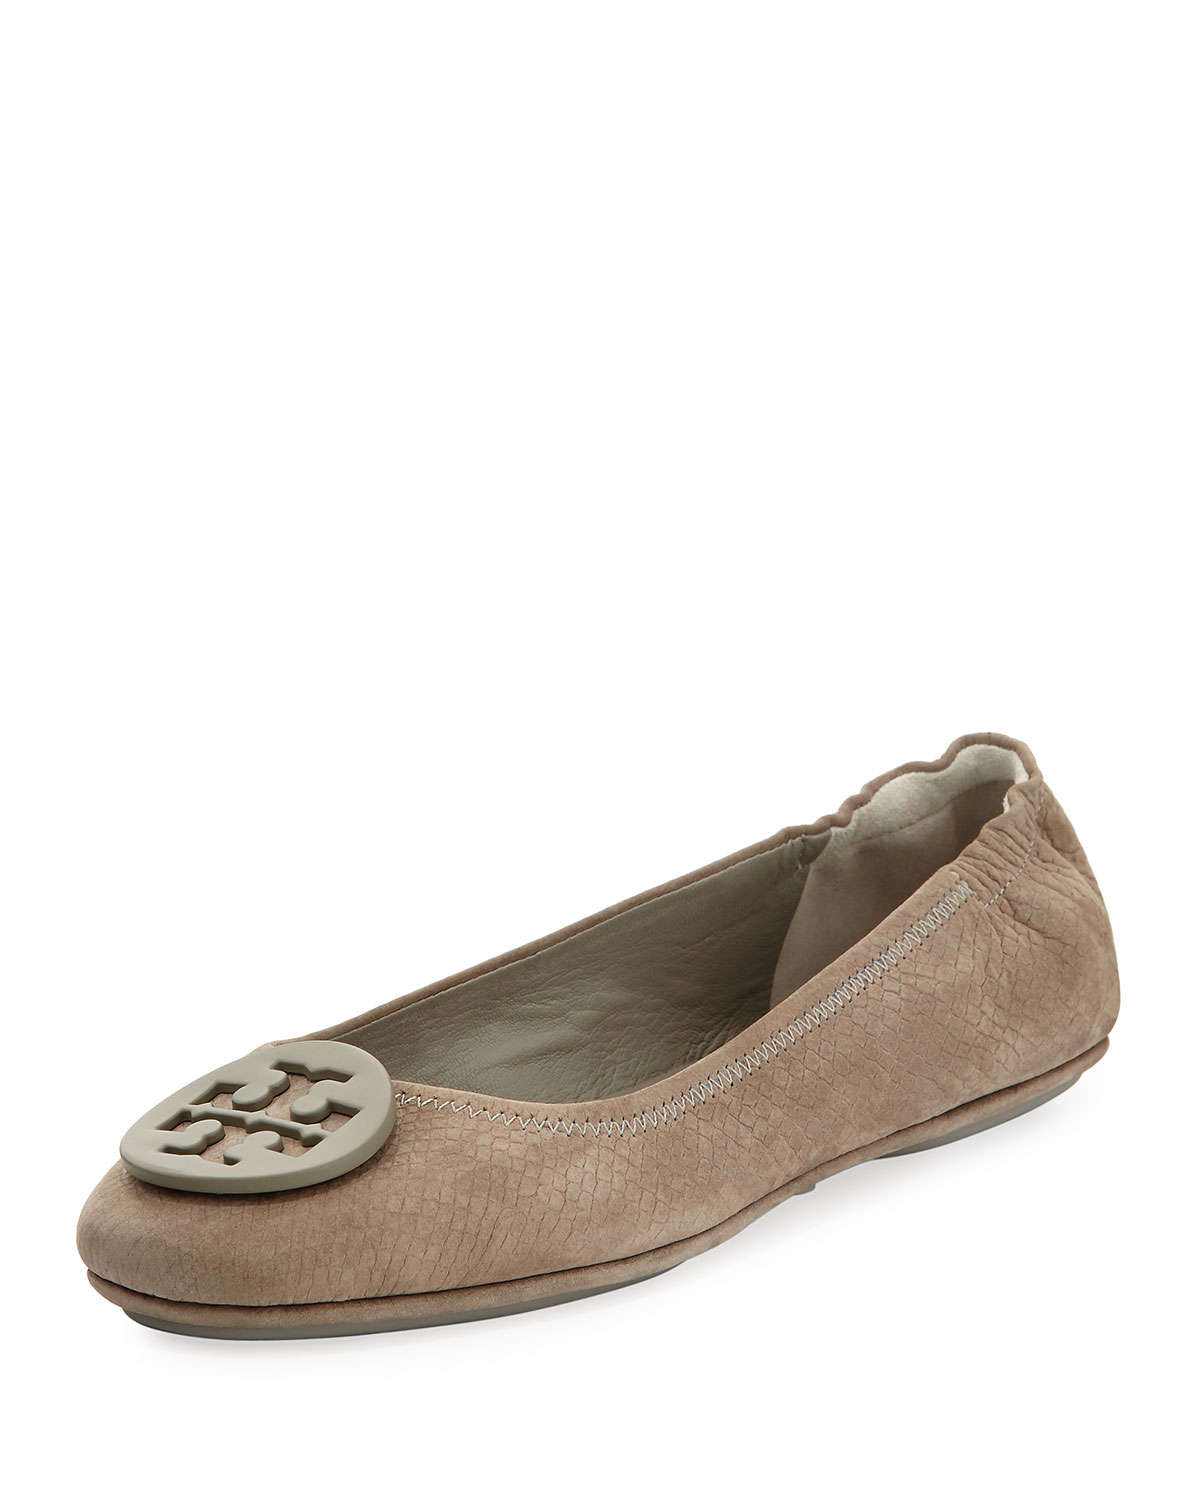 Tory burch Minnie Snake-Embossed Ballet Flat in Gray | Lyst